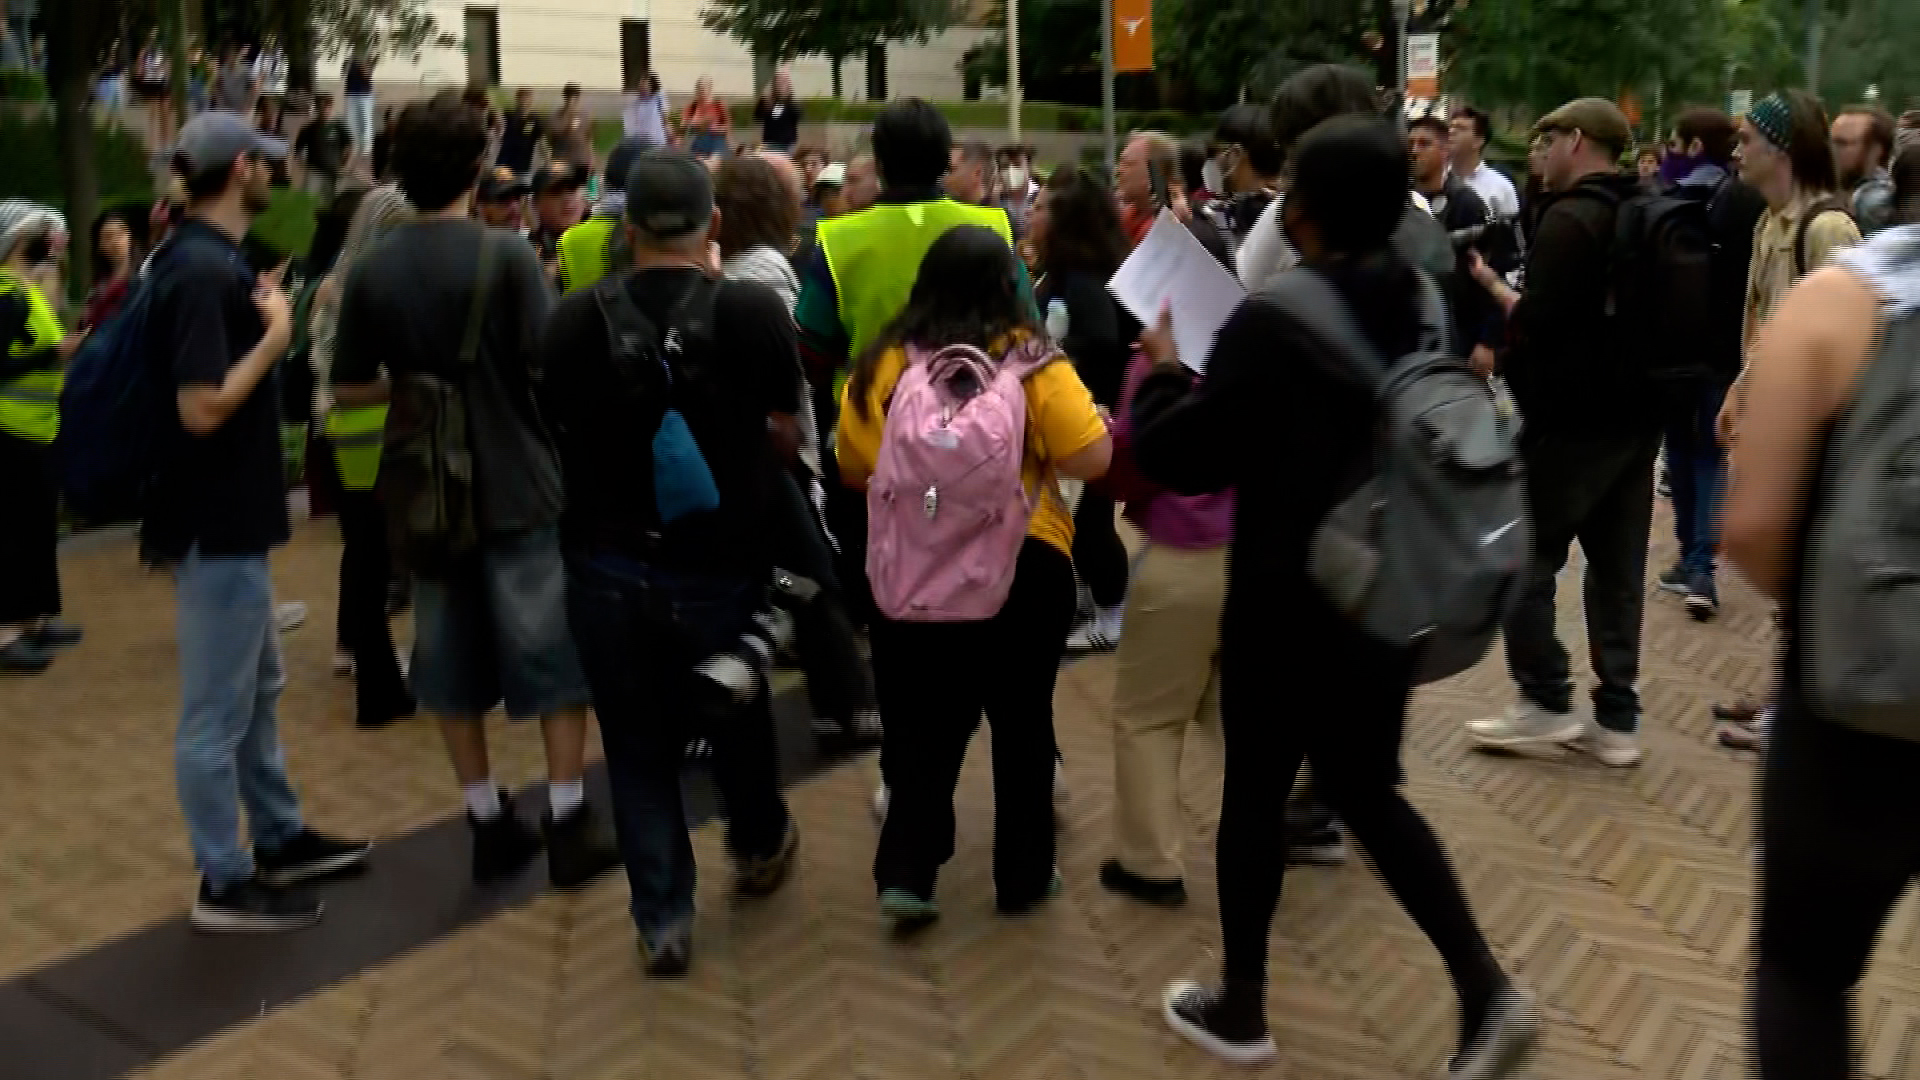 People are seen gathering around an altercation during protests at University of Texas in Austin today.